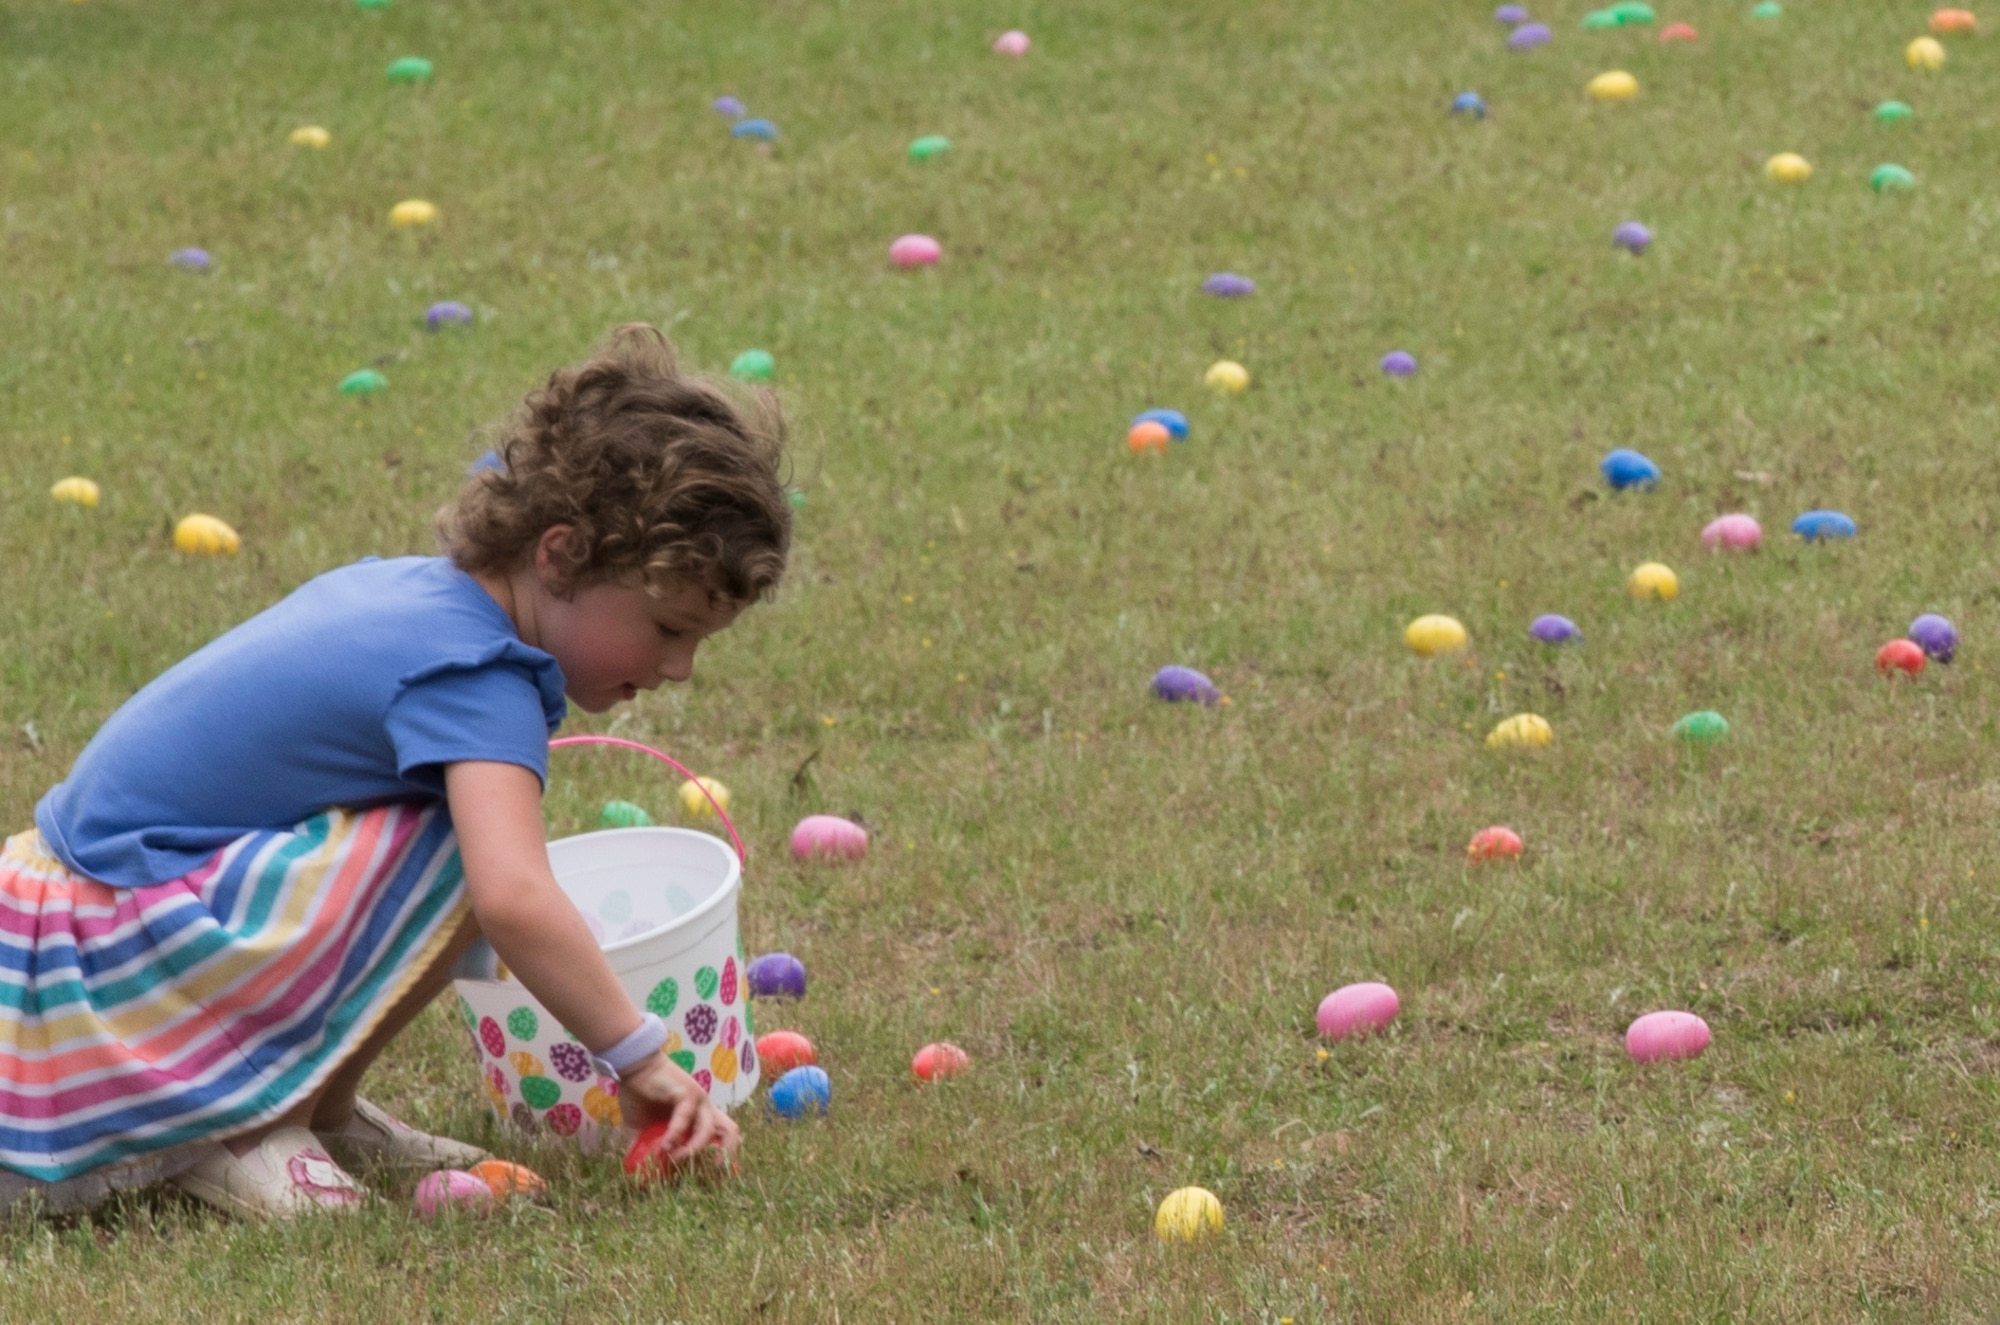 A Team Shaw child picks up an egg during a children's’ Easter egg hunt on Shaw Air Force Base, SC, April 13, 2019.